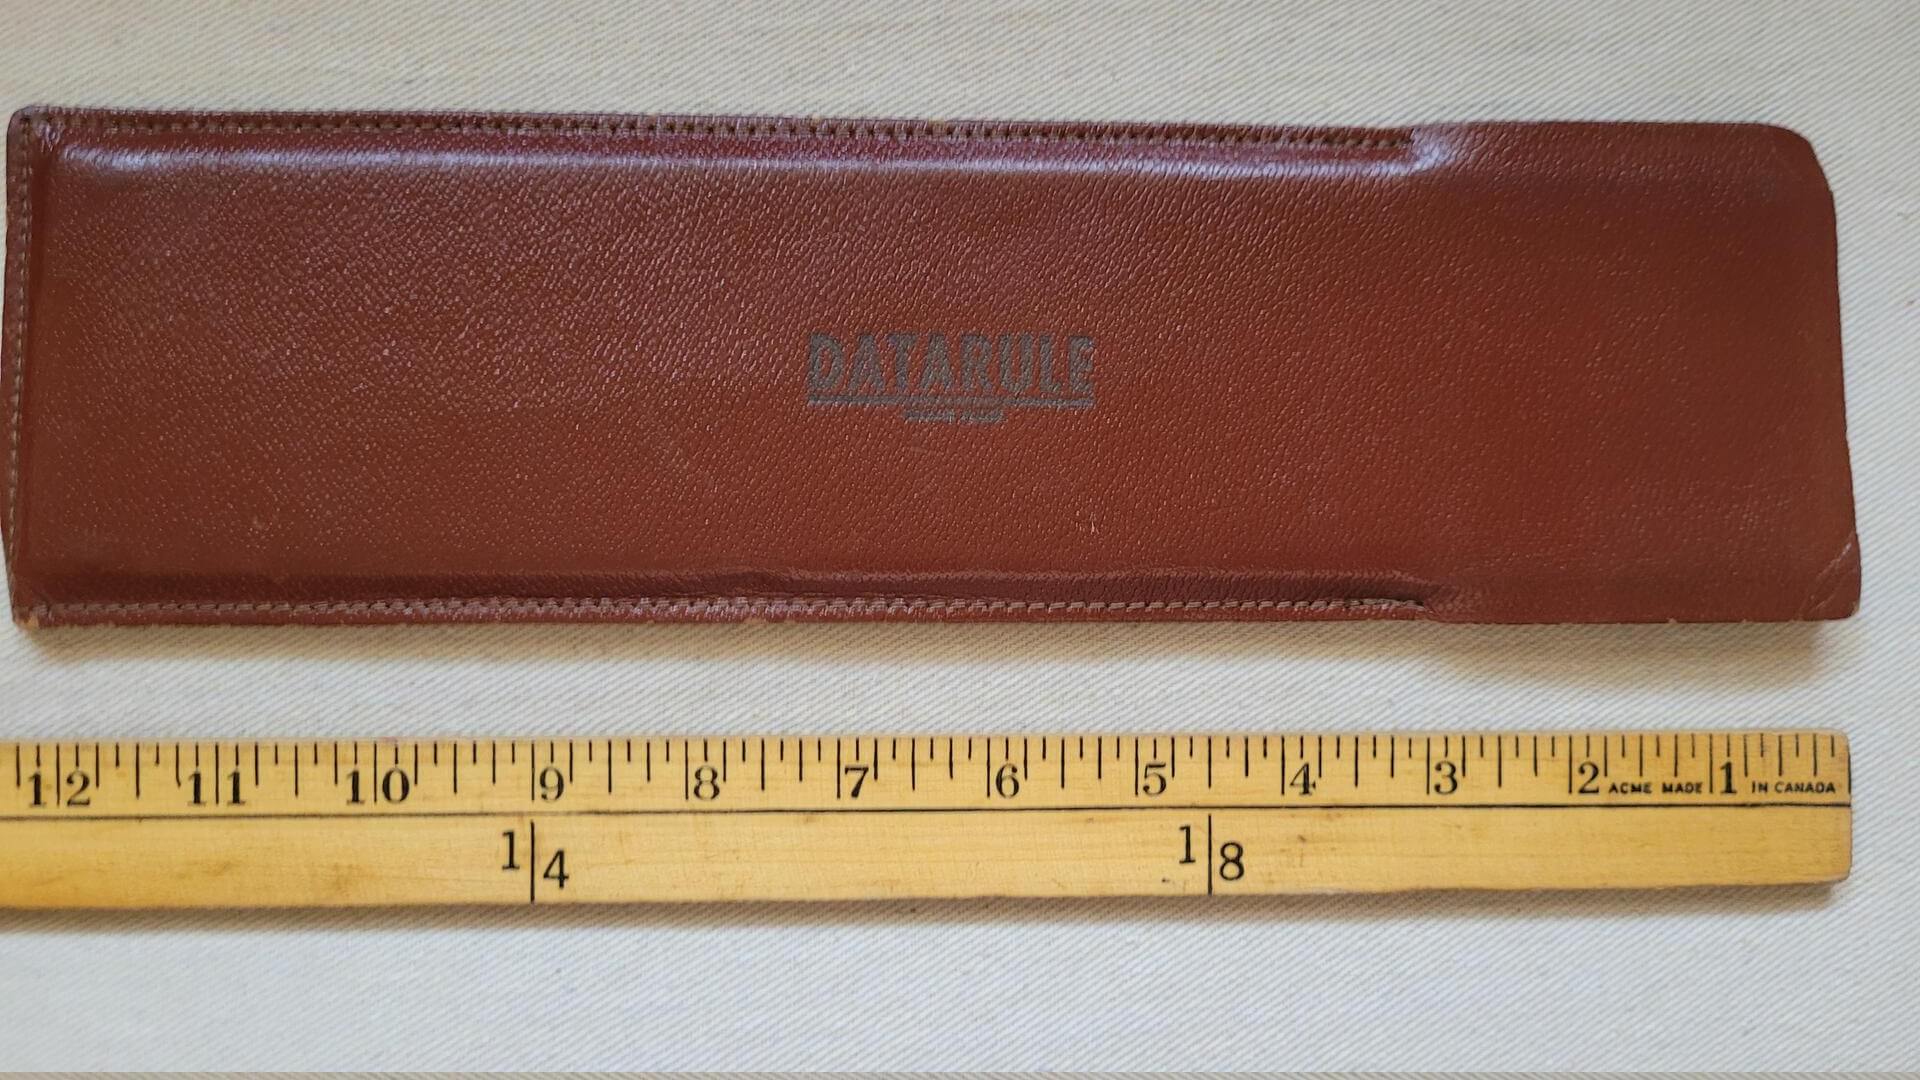 Rare Datarule Electrical Apparatus Computer Slide Rule w Leather Case Model B - 1950 Samuel Heller / Datarule Publishing Co Scarsdale NY - Vintage collectible Electrical Engineer Tools